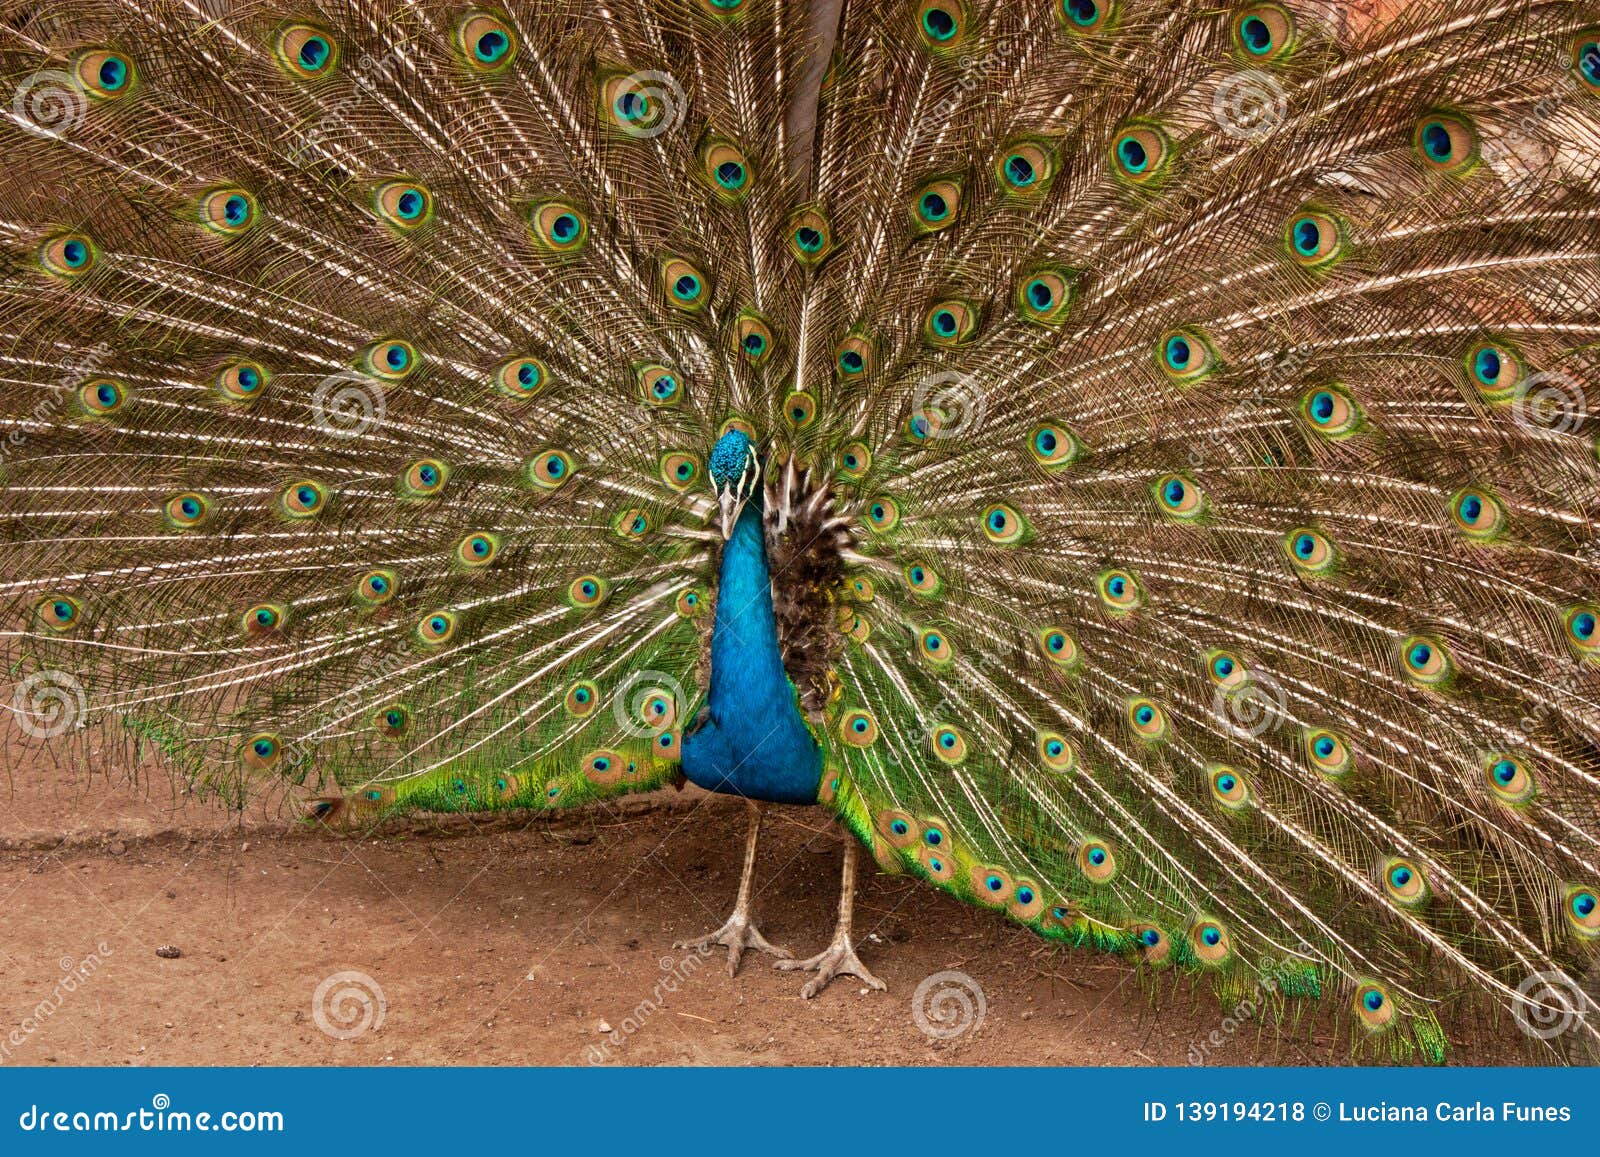 peackock with open feathers . pavo real con plumaje extendido